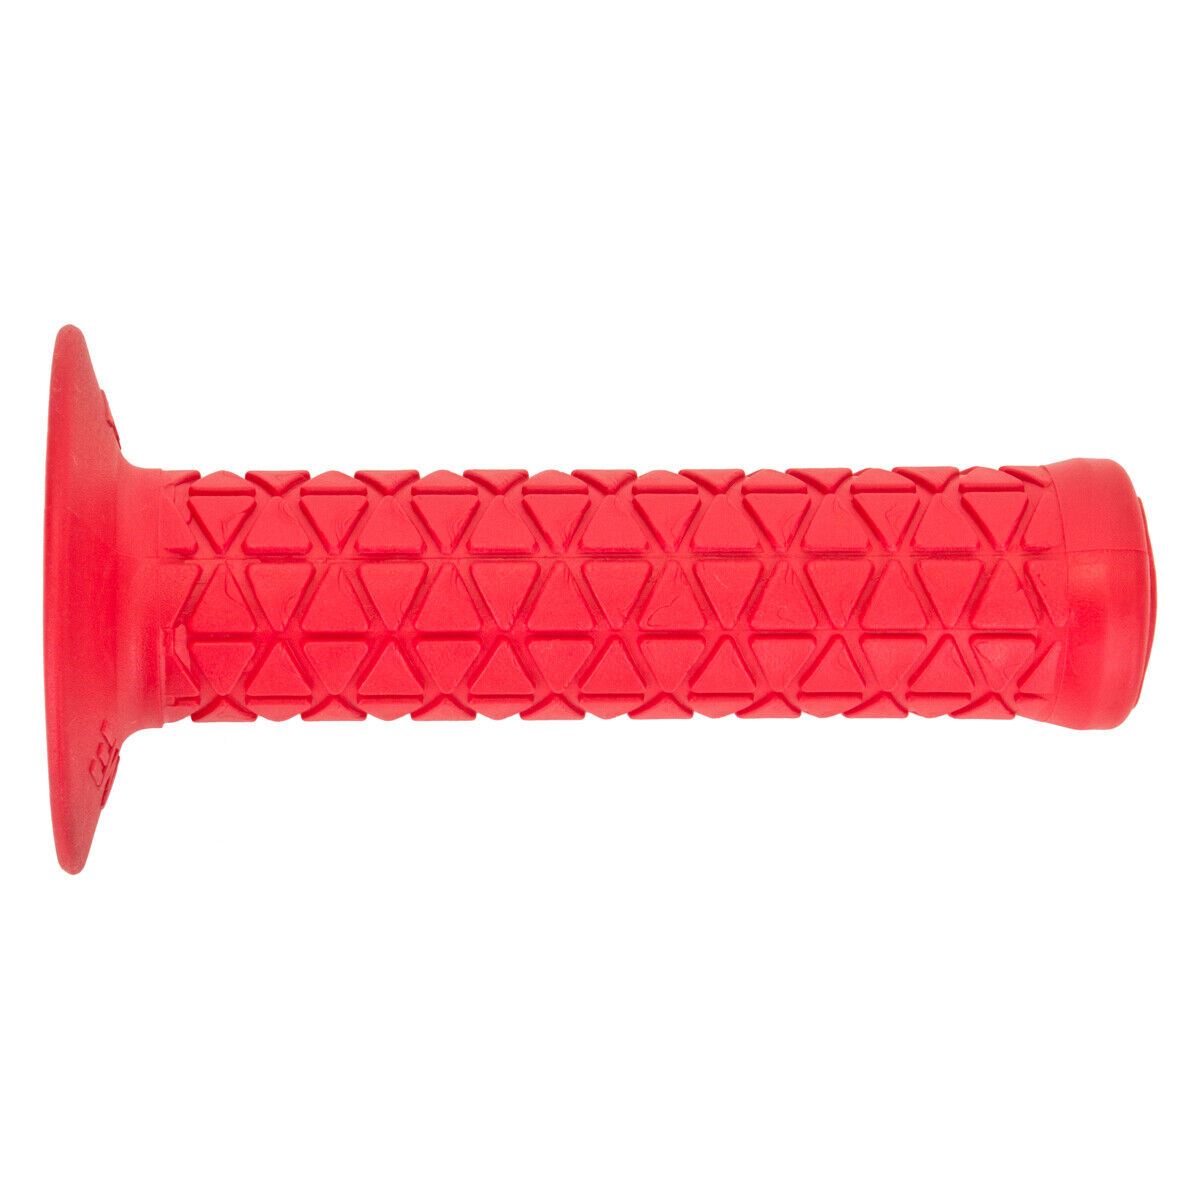 OLD SCHOOL BMX AME Tri Grips RED Bike Bicycle Grips PAIR